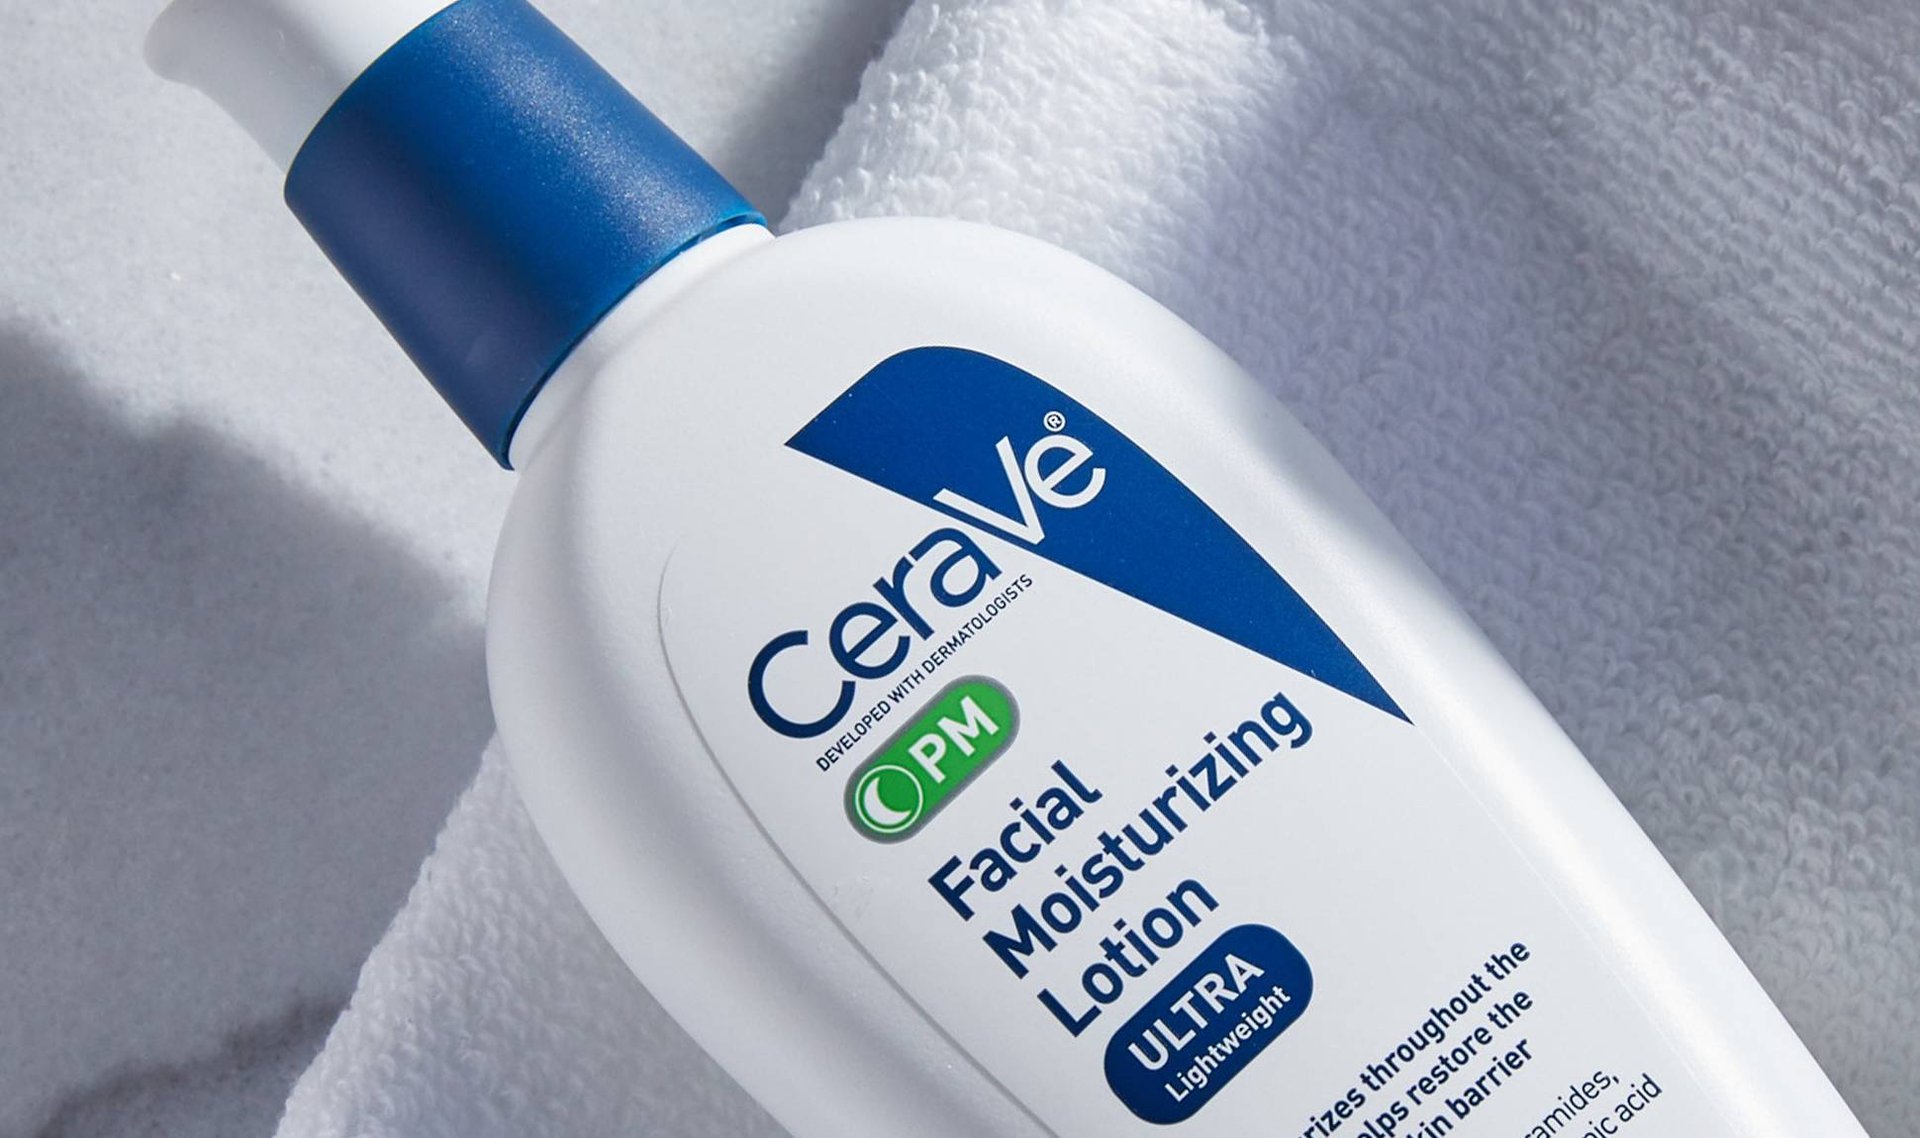 An Editor With Dehydrated, Oily Skin Reviewed the CeraVe PM Moisturizing Lotion